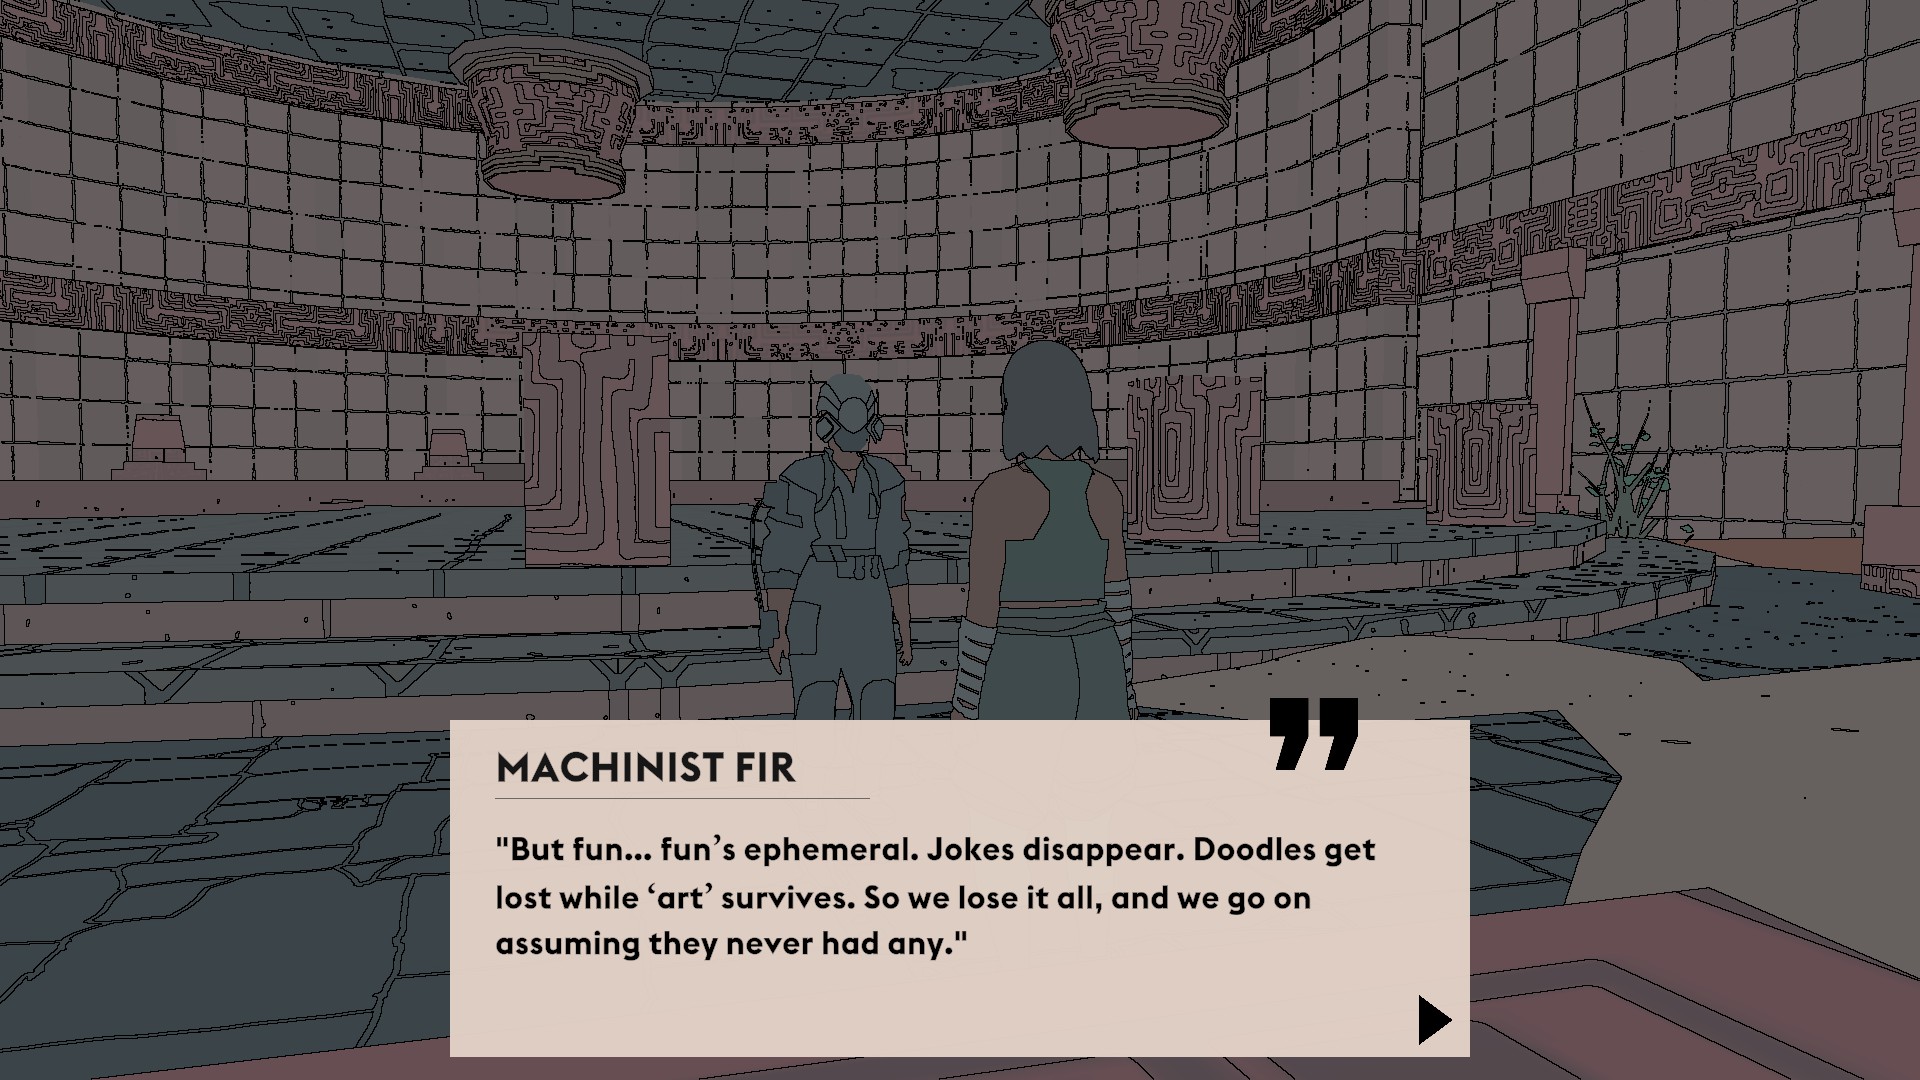 MACHINIST FIR: But fun... fun's ephemeral. Jokes disappear. Doodles get lost while 'art' survives. So we lose it all, and we go on assuming they never had any.